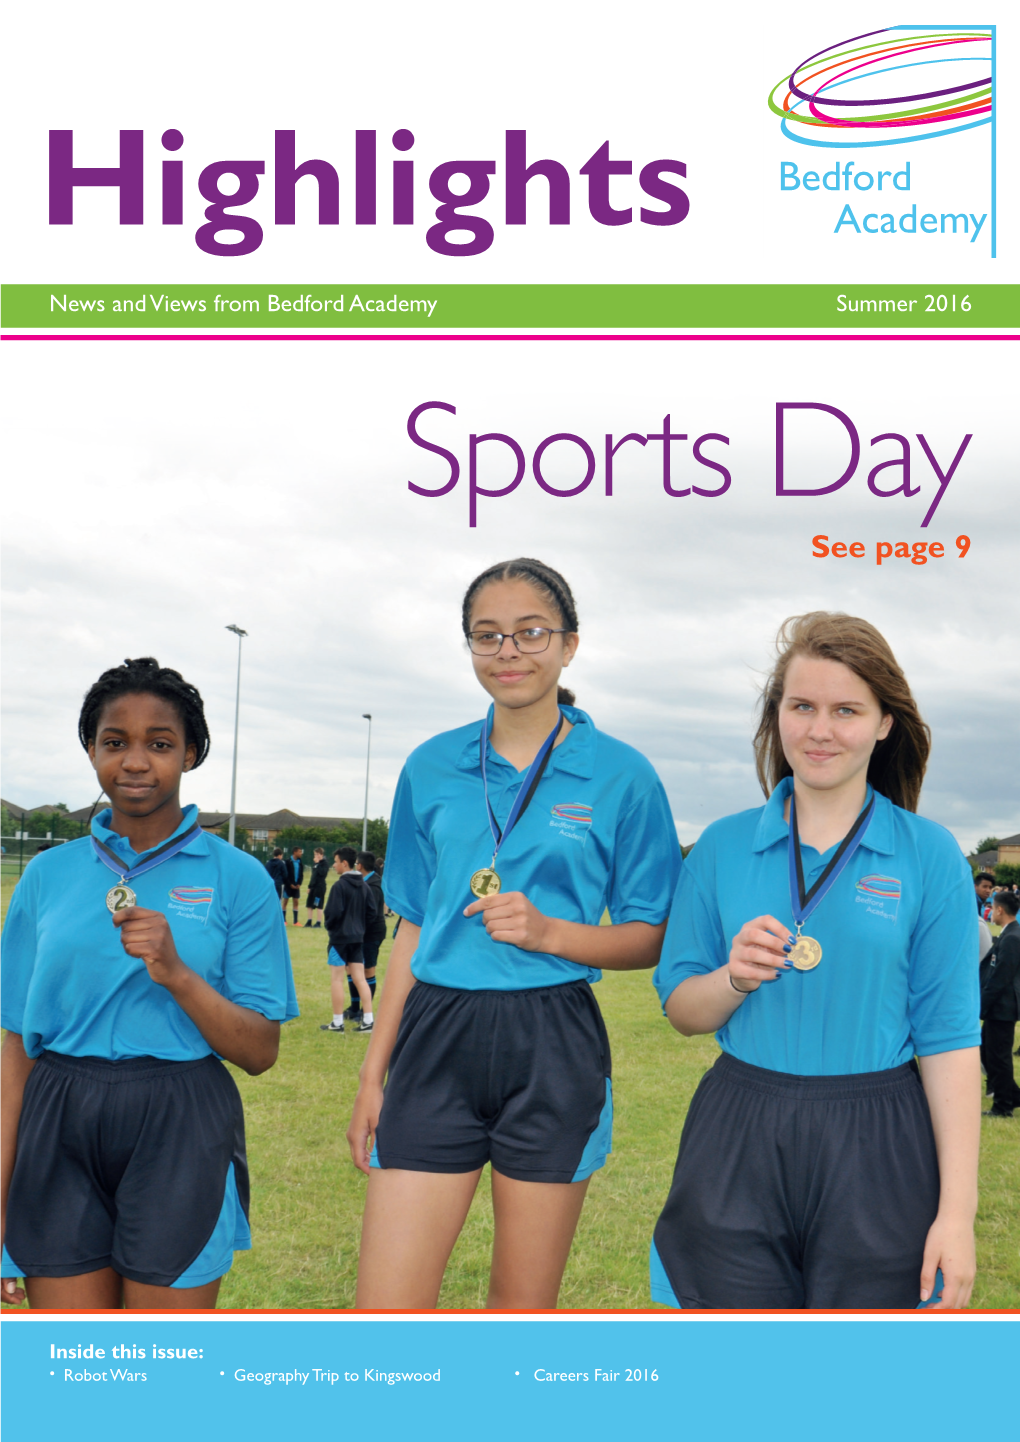 Bedford Academy Summer 2016 Sports Day See Page 9